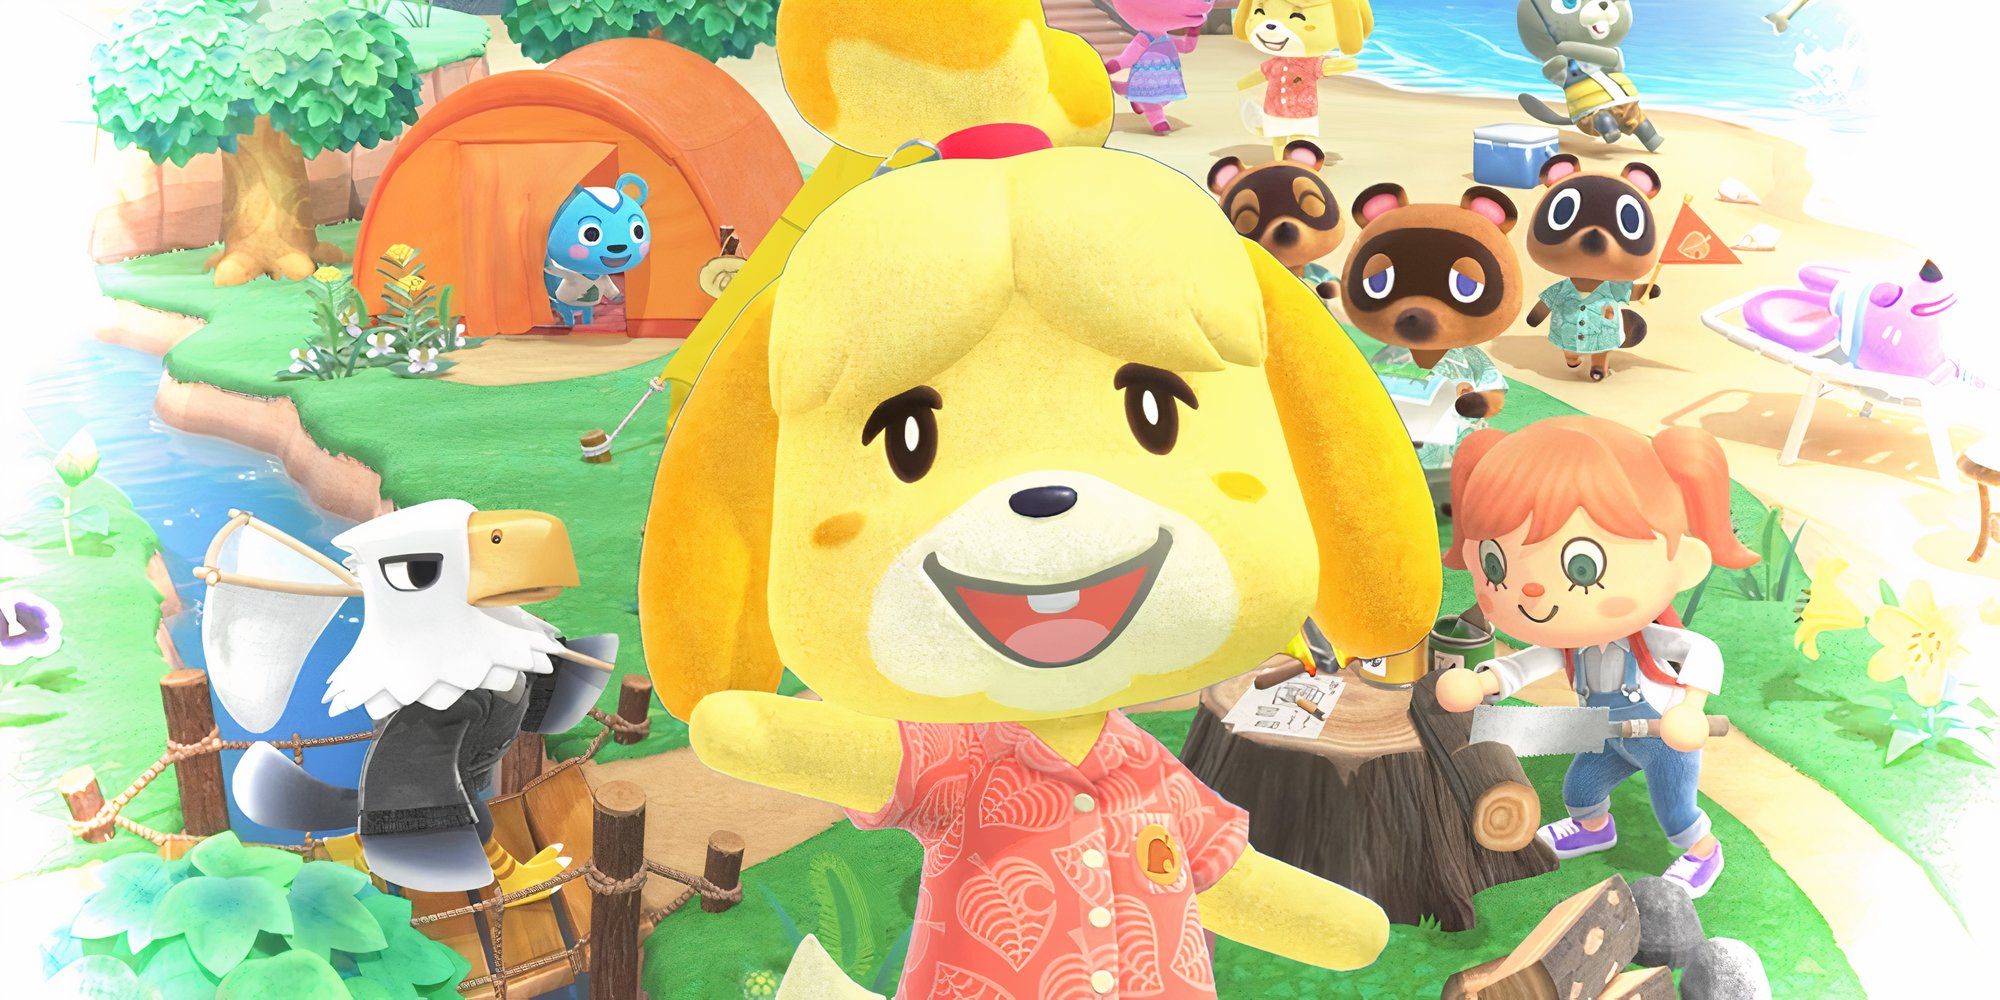 Isabelle with a village behind her